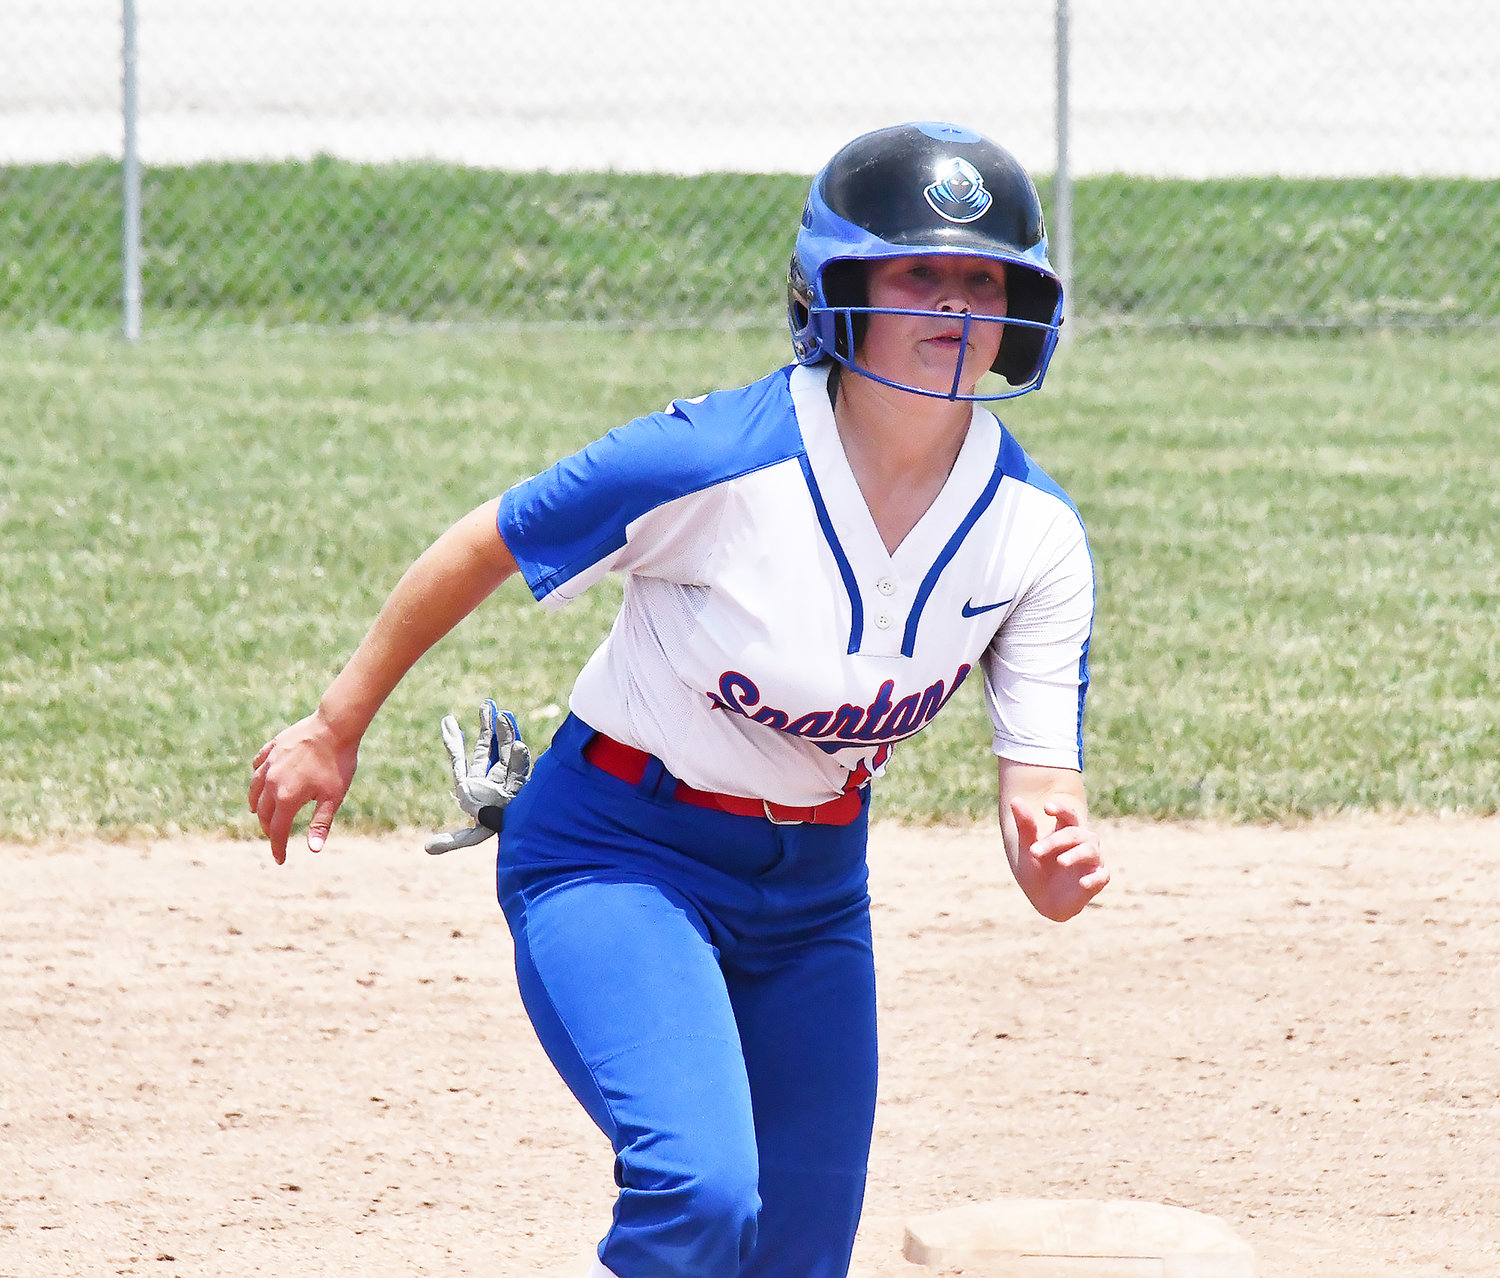 Elizabeth Reisenauer takes off for third base after a Cairo wild pitch.